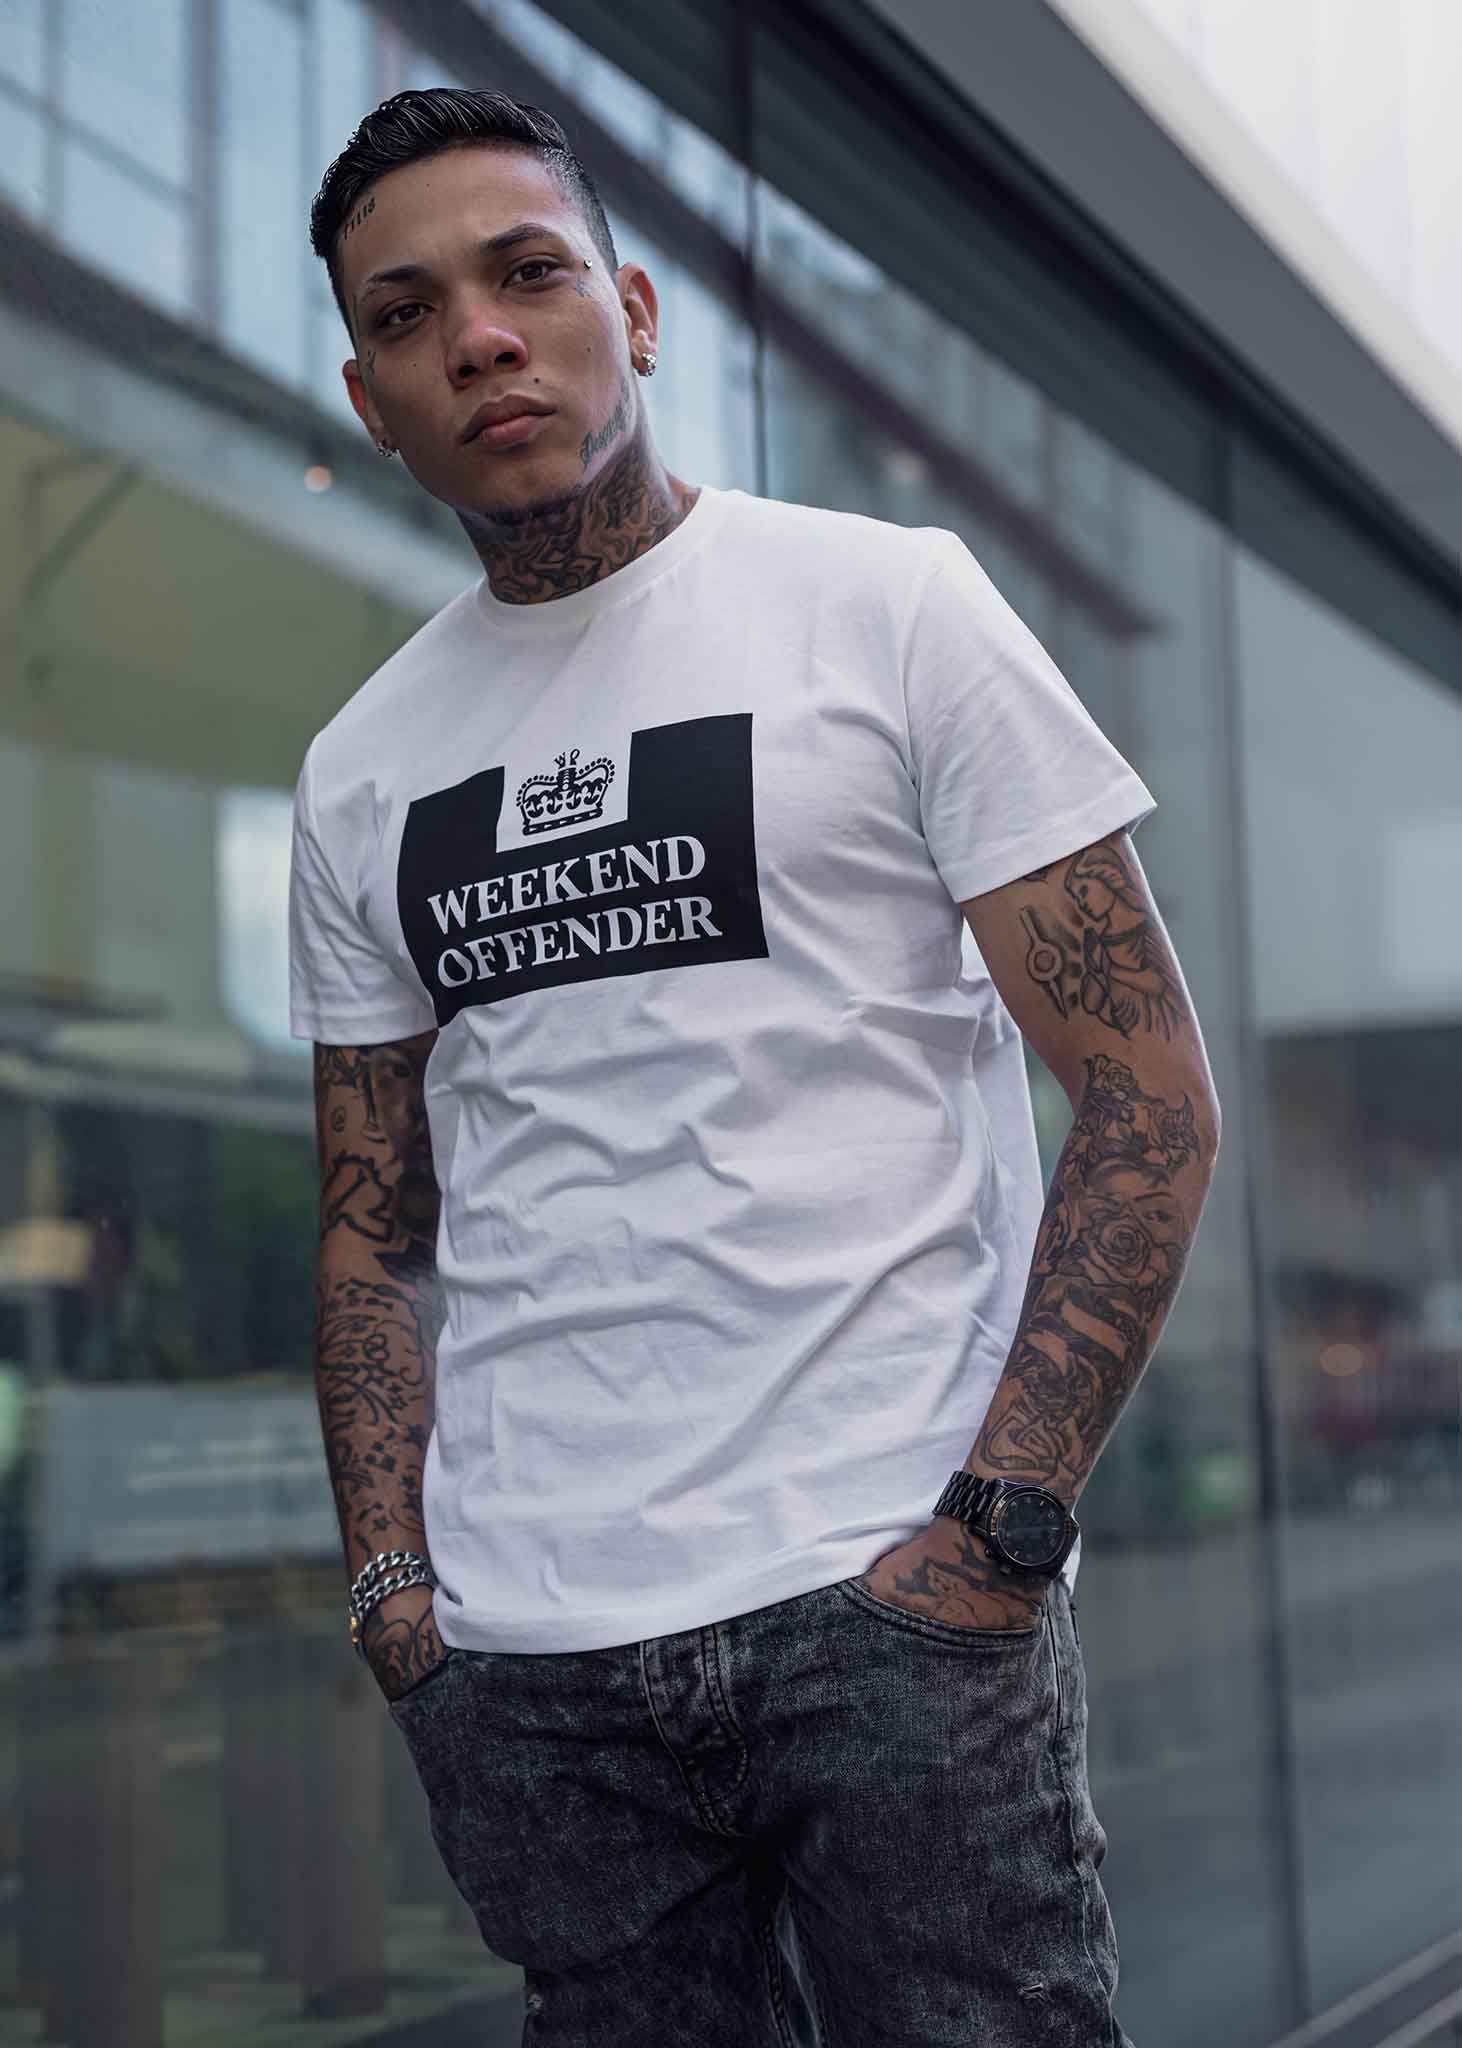 Weekend Offender T-shirts  Prison - white 